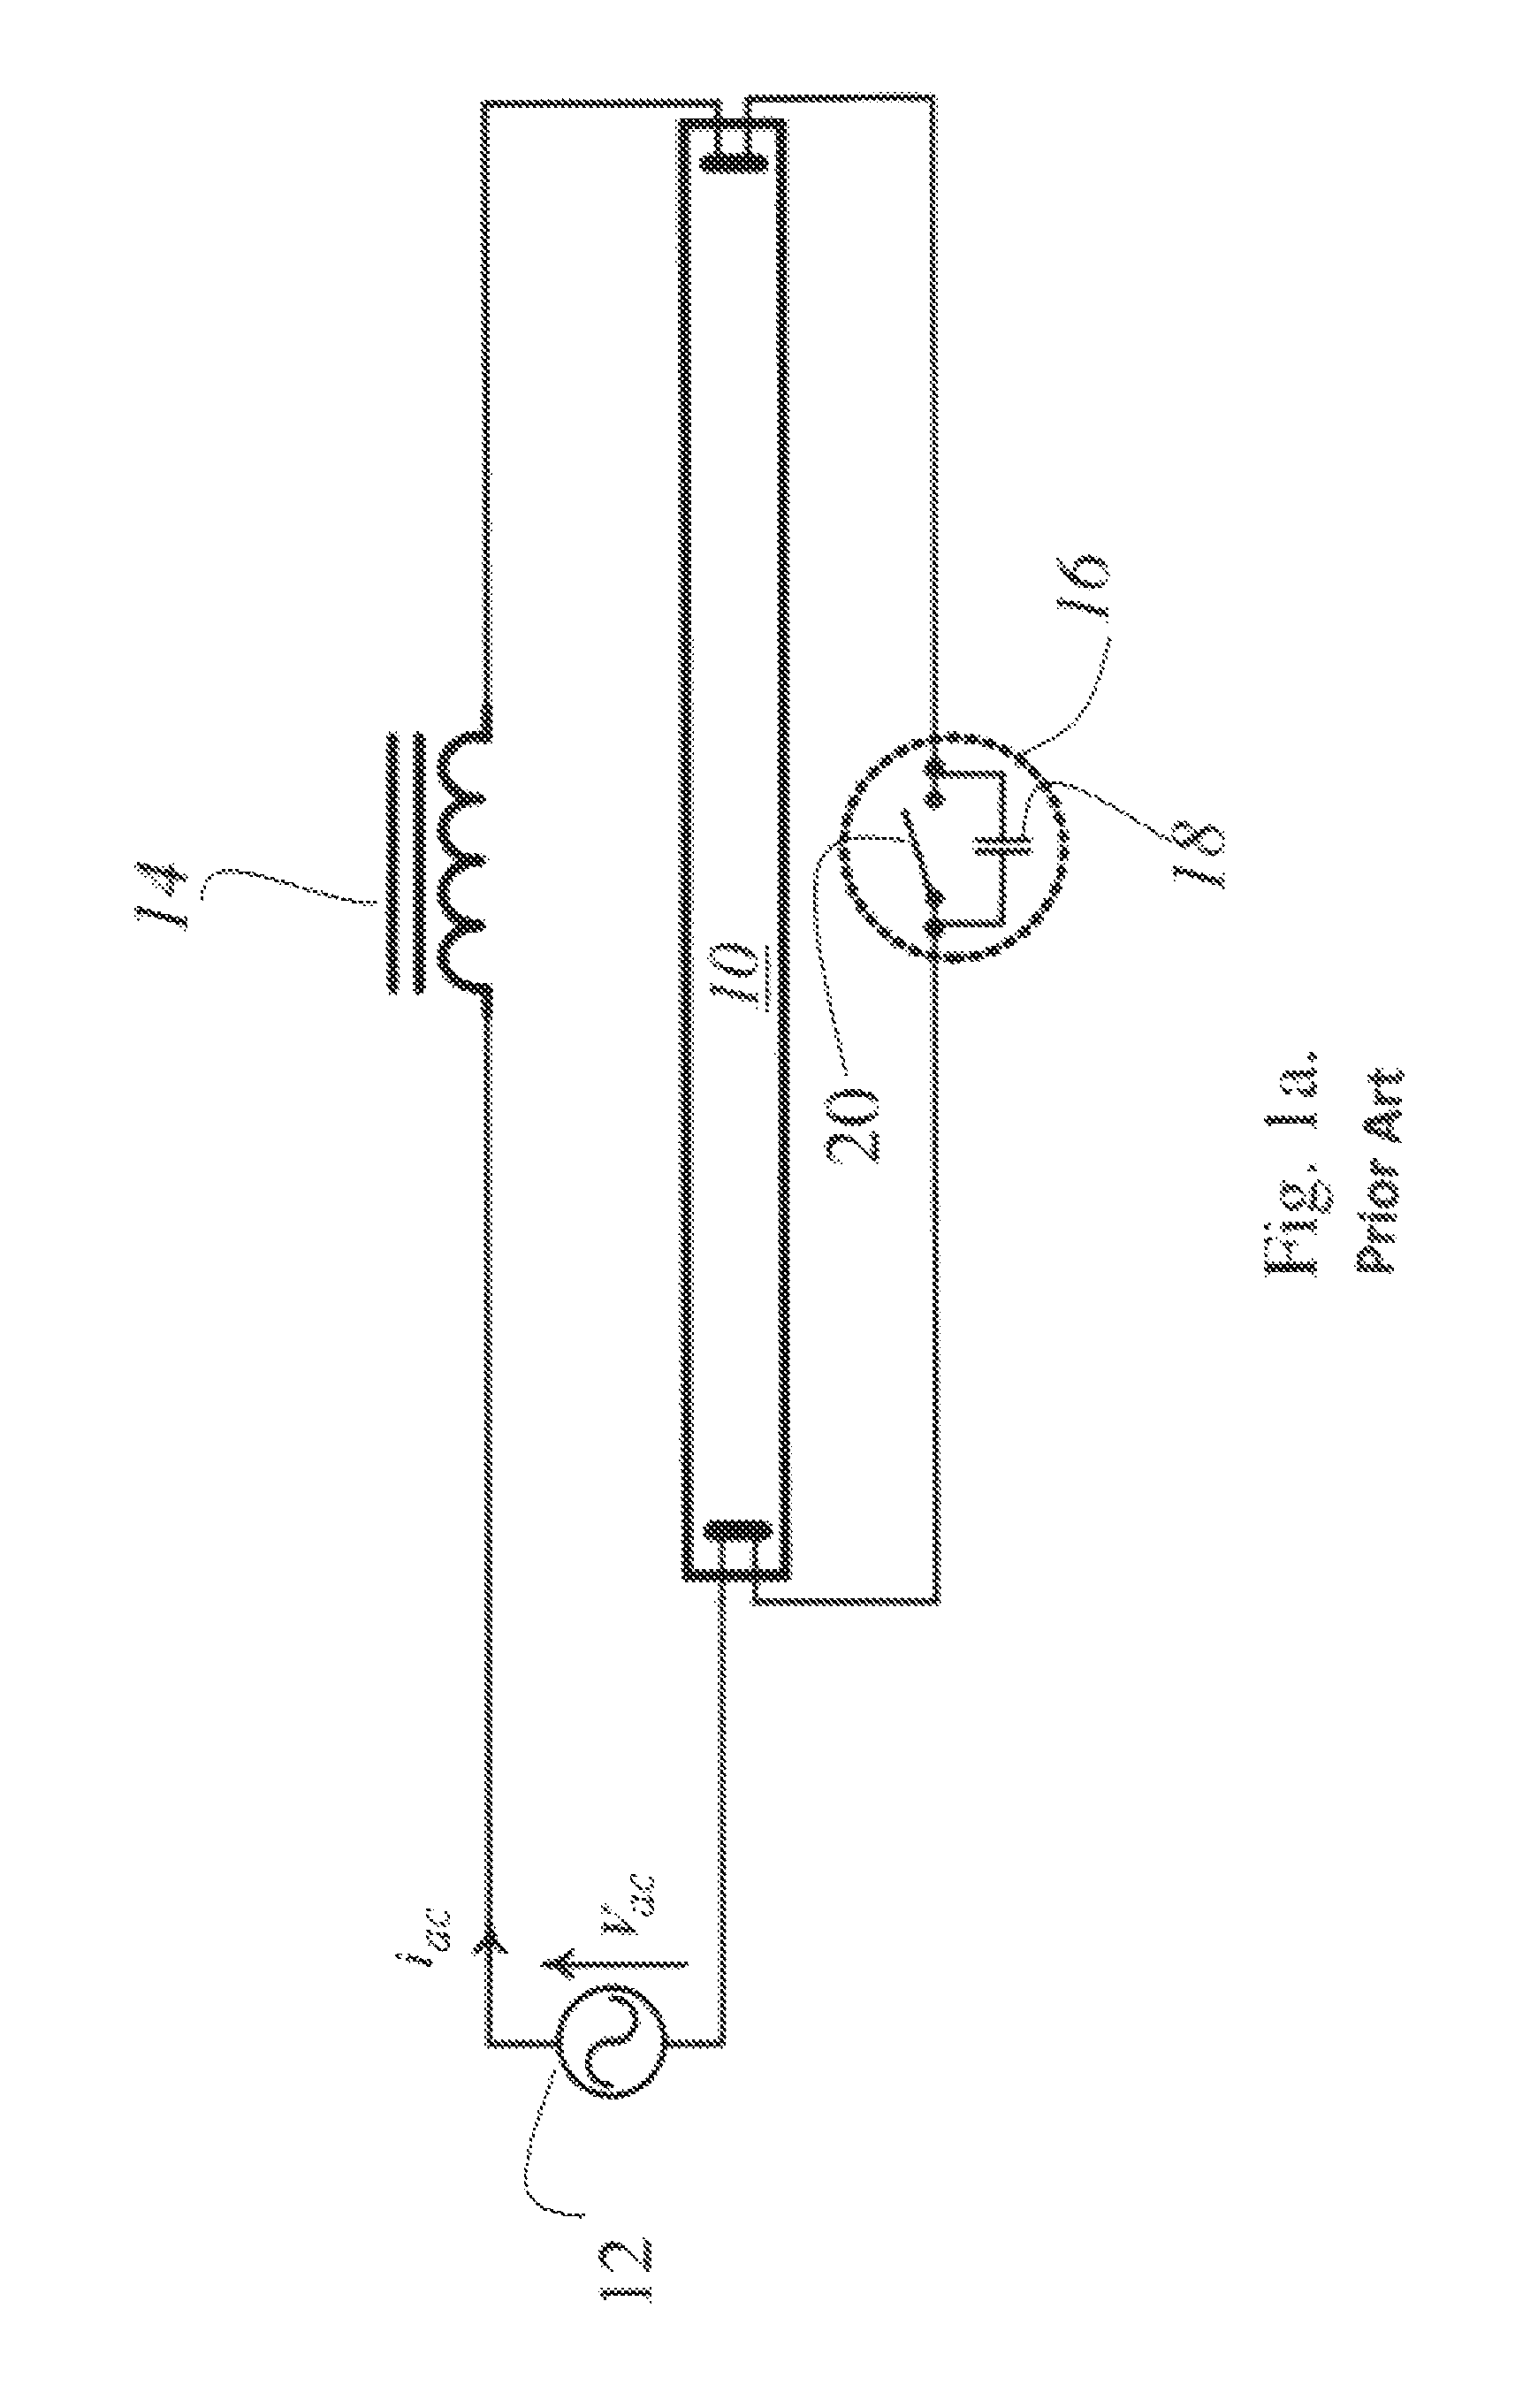 Driver circuit for powering a DC lamp in a non-DC lamp fitting